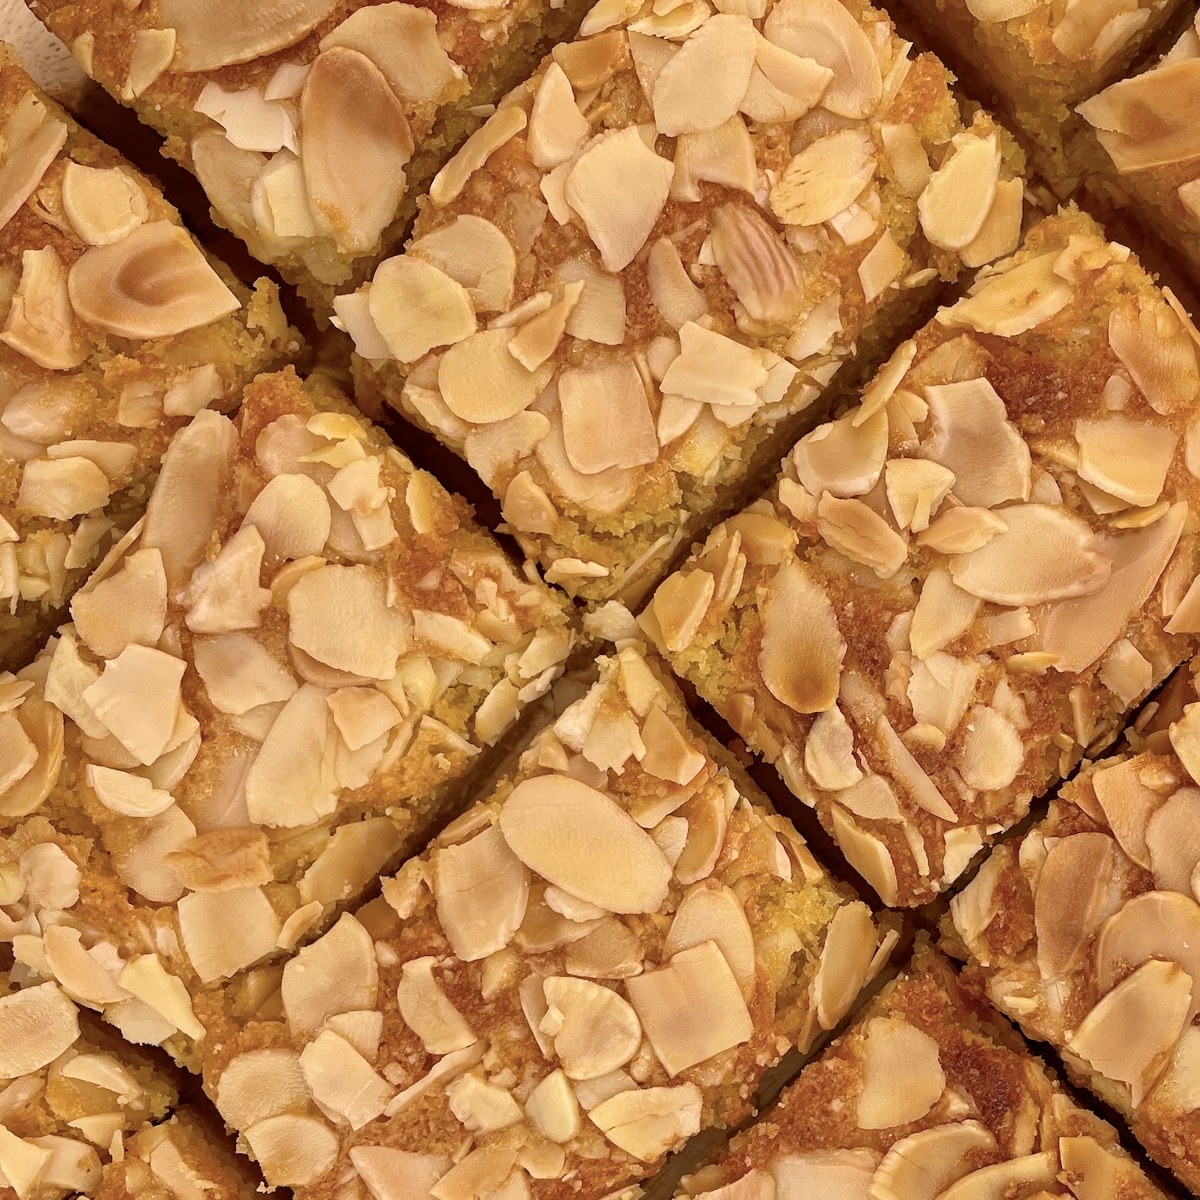 Several slices of almond cake topped with almonds.